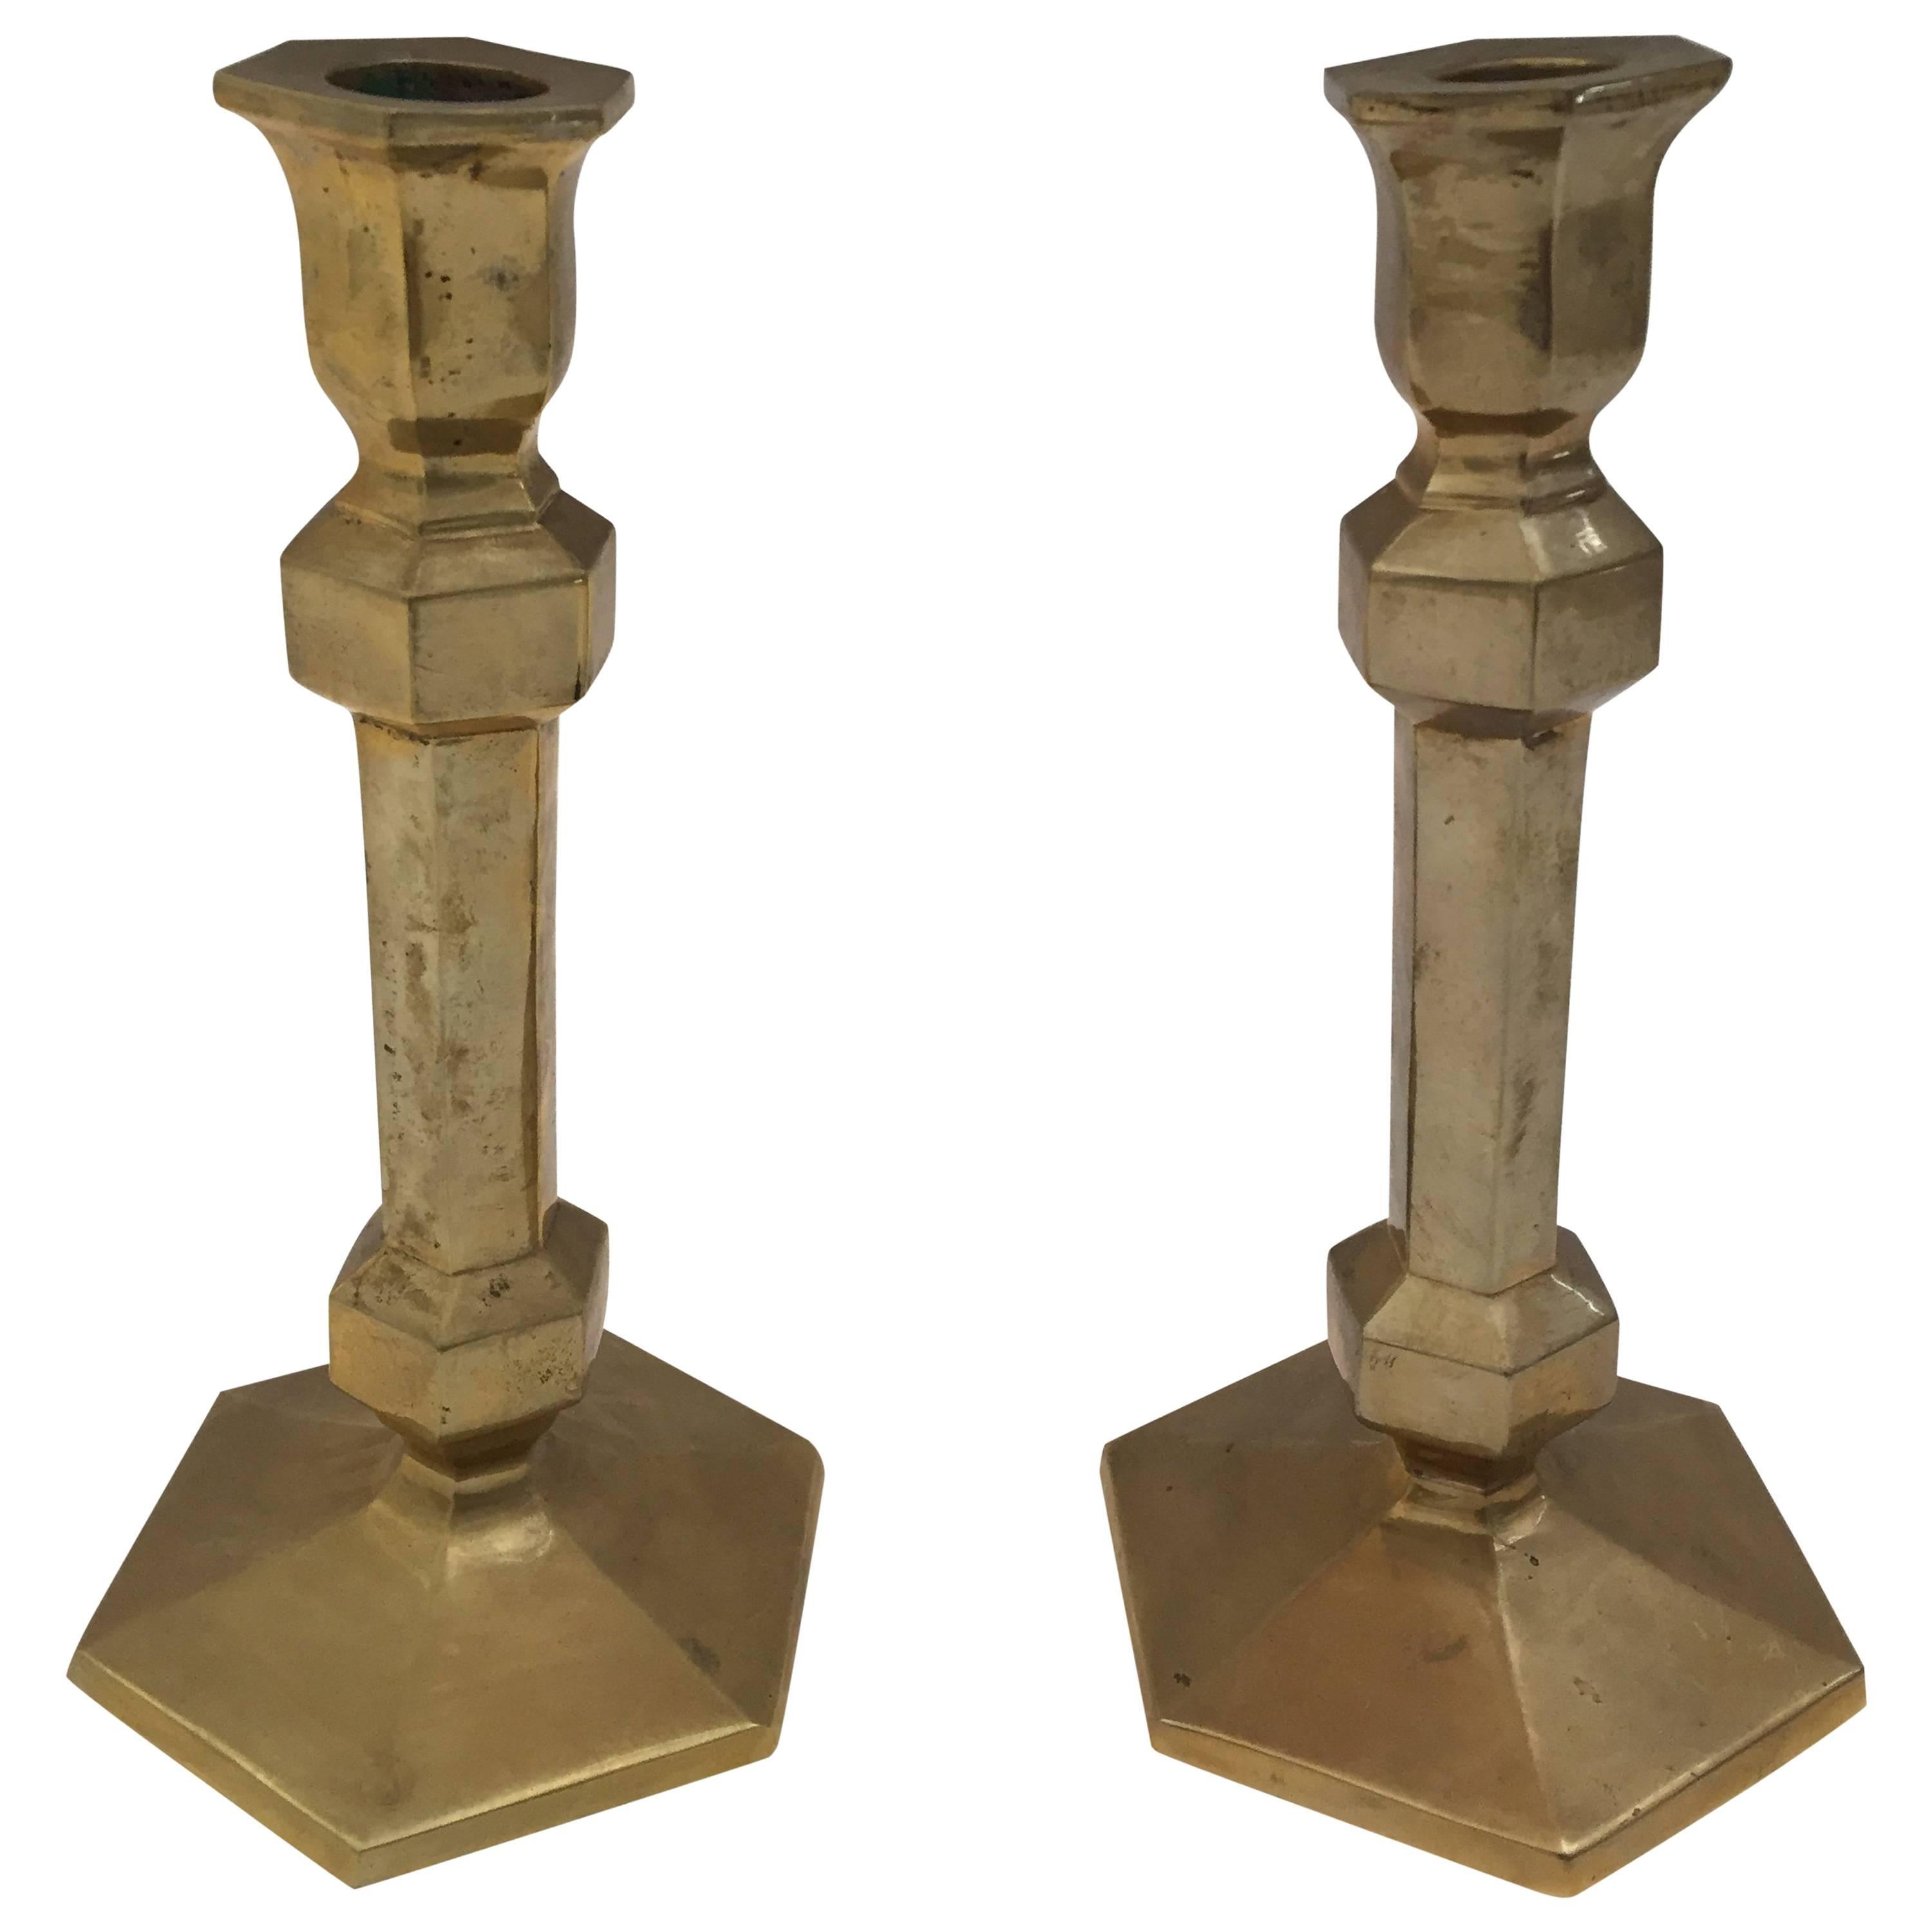 Pair of Victorian brass polished candlesticks with a molded hexagonal base.
Nice elegant forms with original patina.
Great brass decorative art objects.